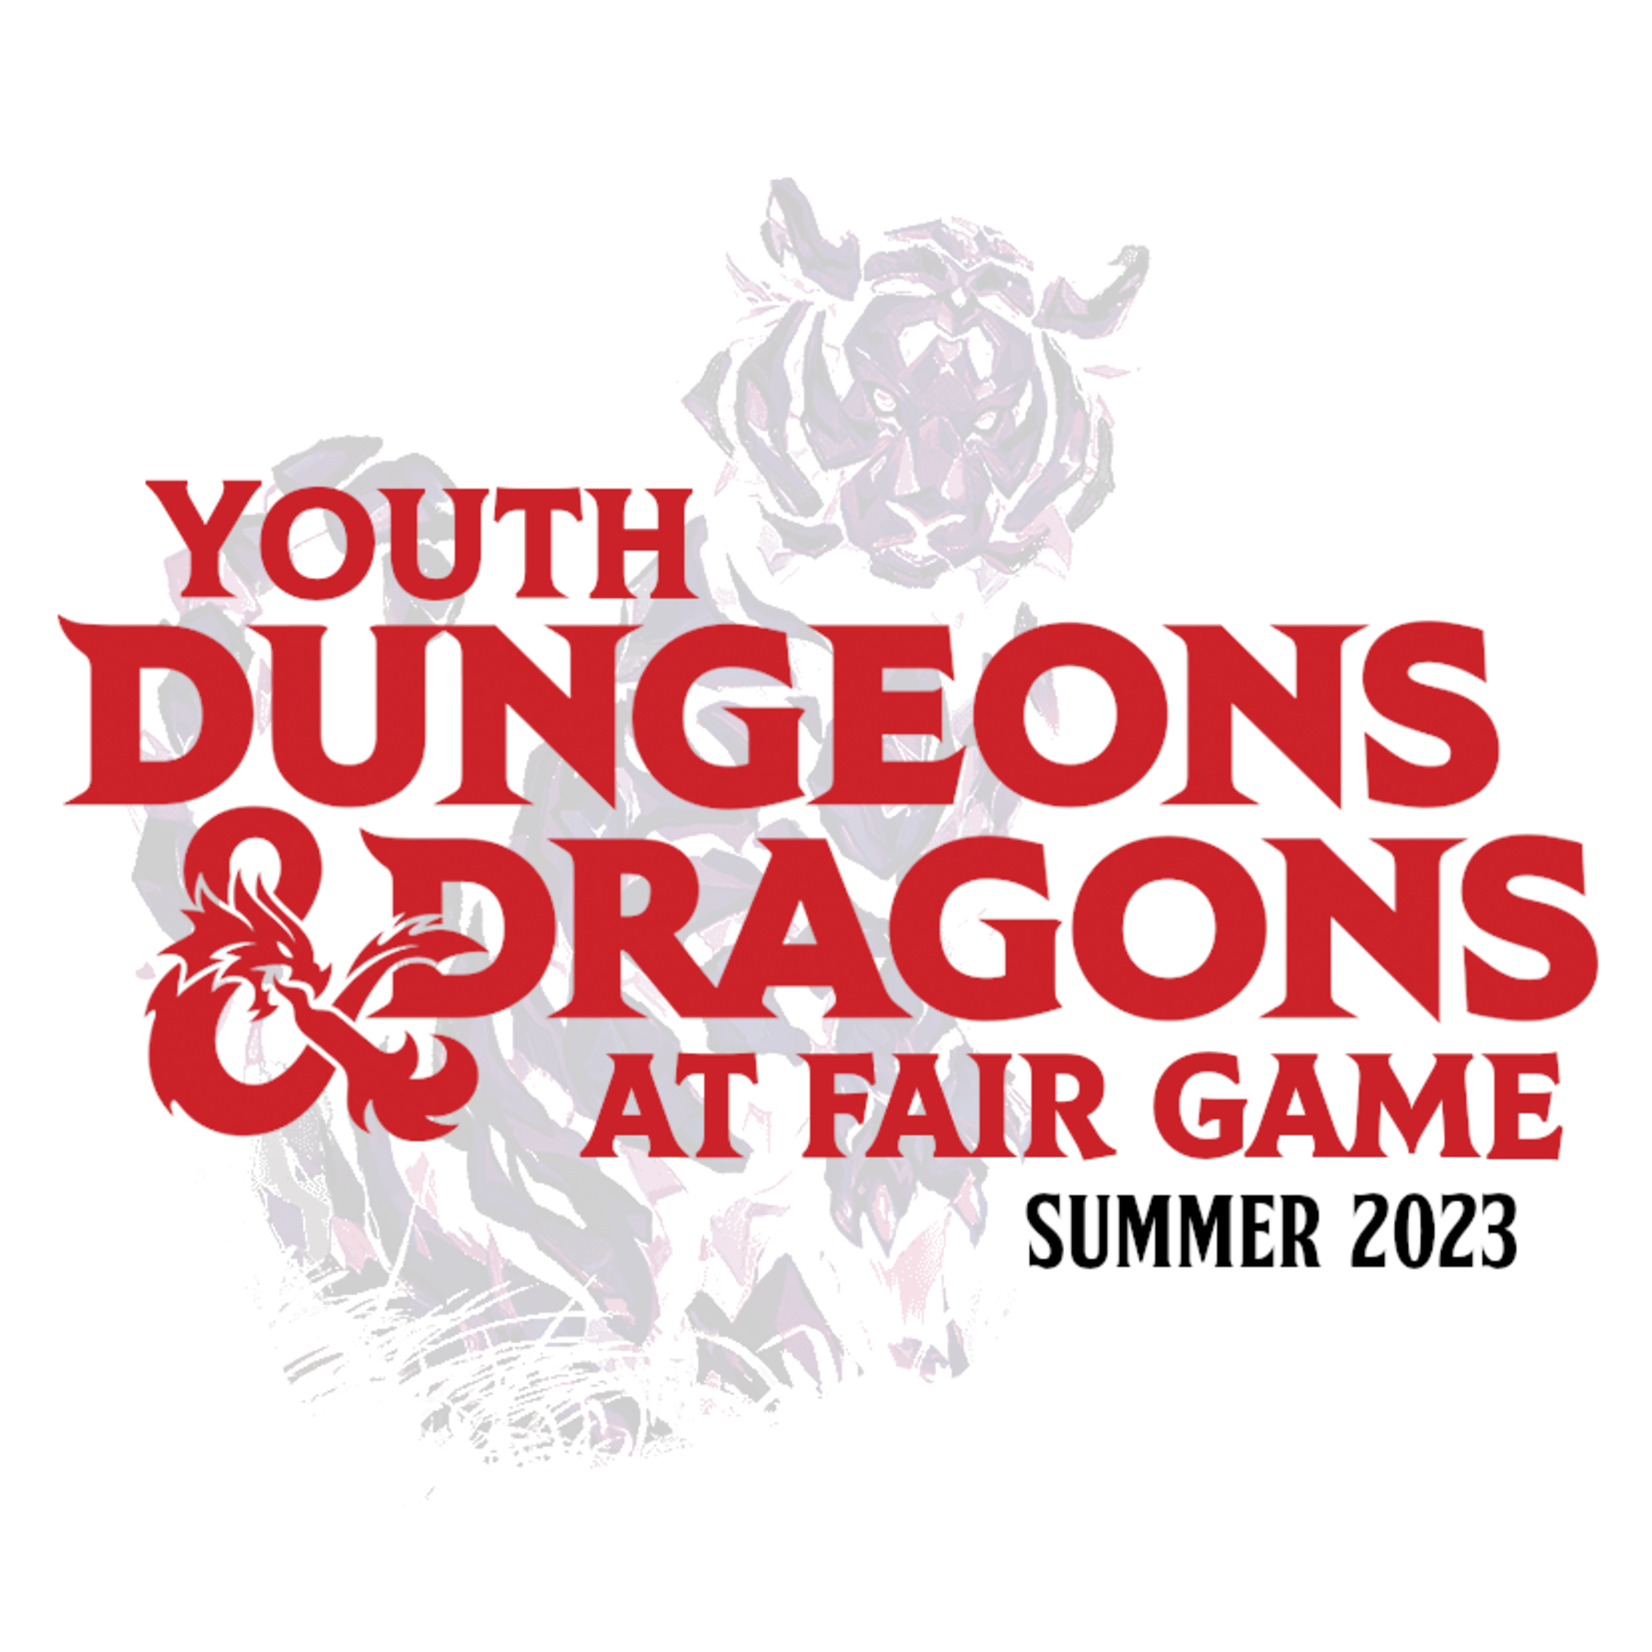 Fair Game YDND Summer 2023: Group DW1 - Wednesday Downers Grove 4-6 PM CST (Ages 8-13)